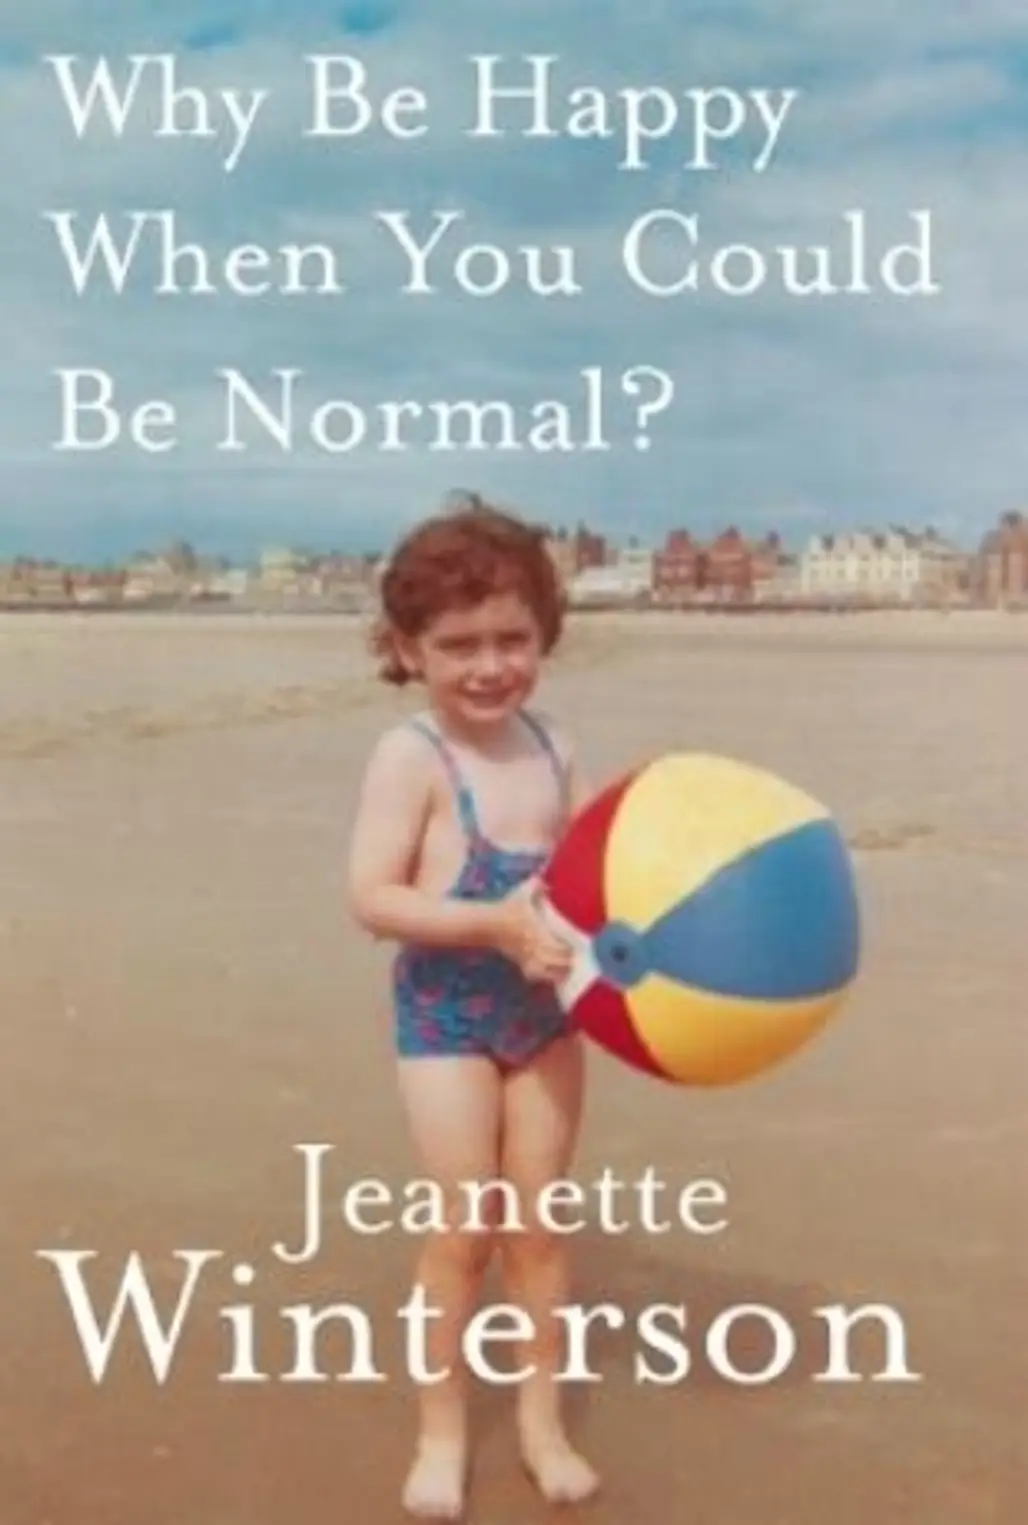 Why Be Happy when You Can Be Normal? by Jeanette Winterson